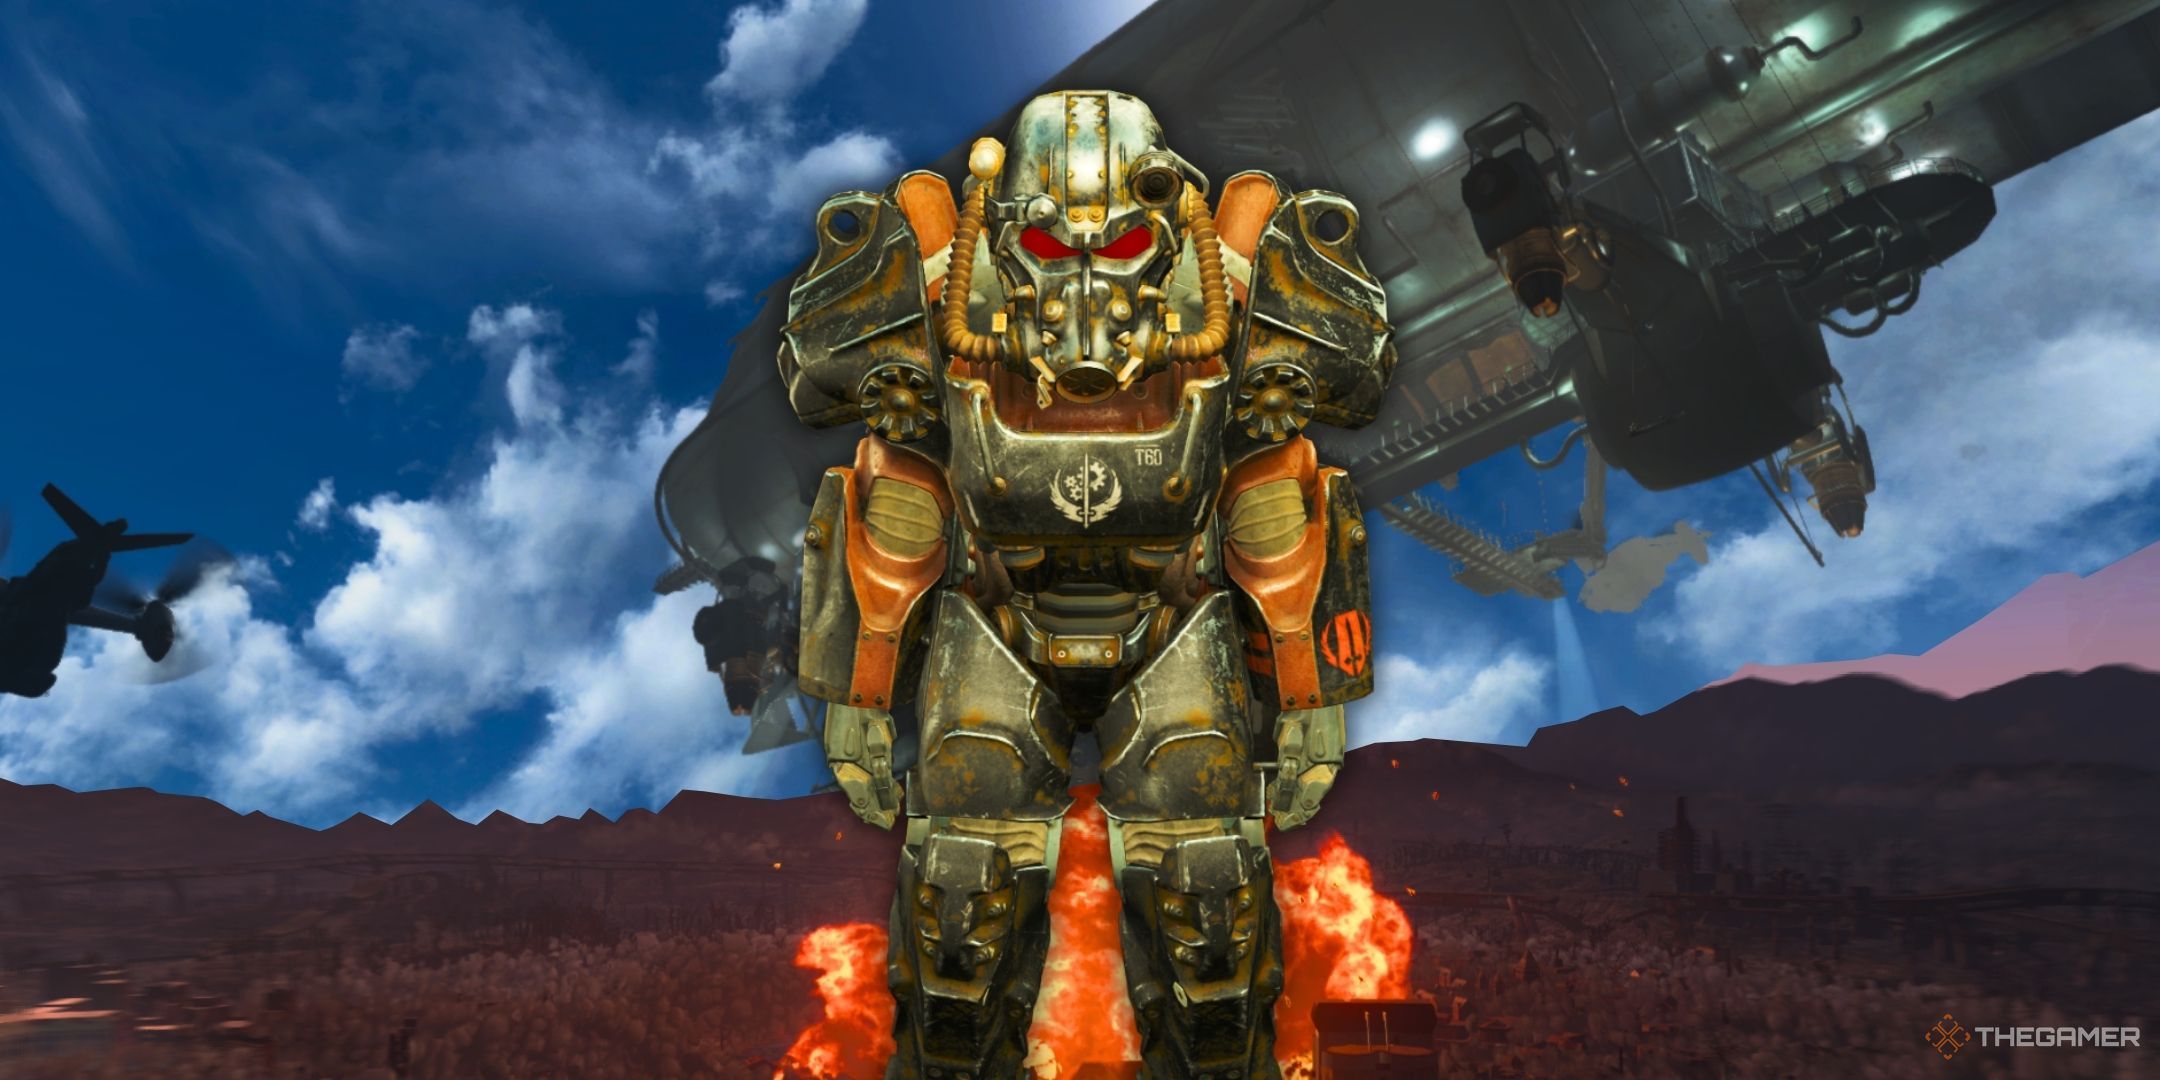 An illuminated set of Paladin Power Armor, with the Prydwen airship and a large explosion seen in the background.